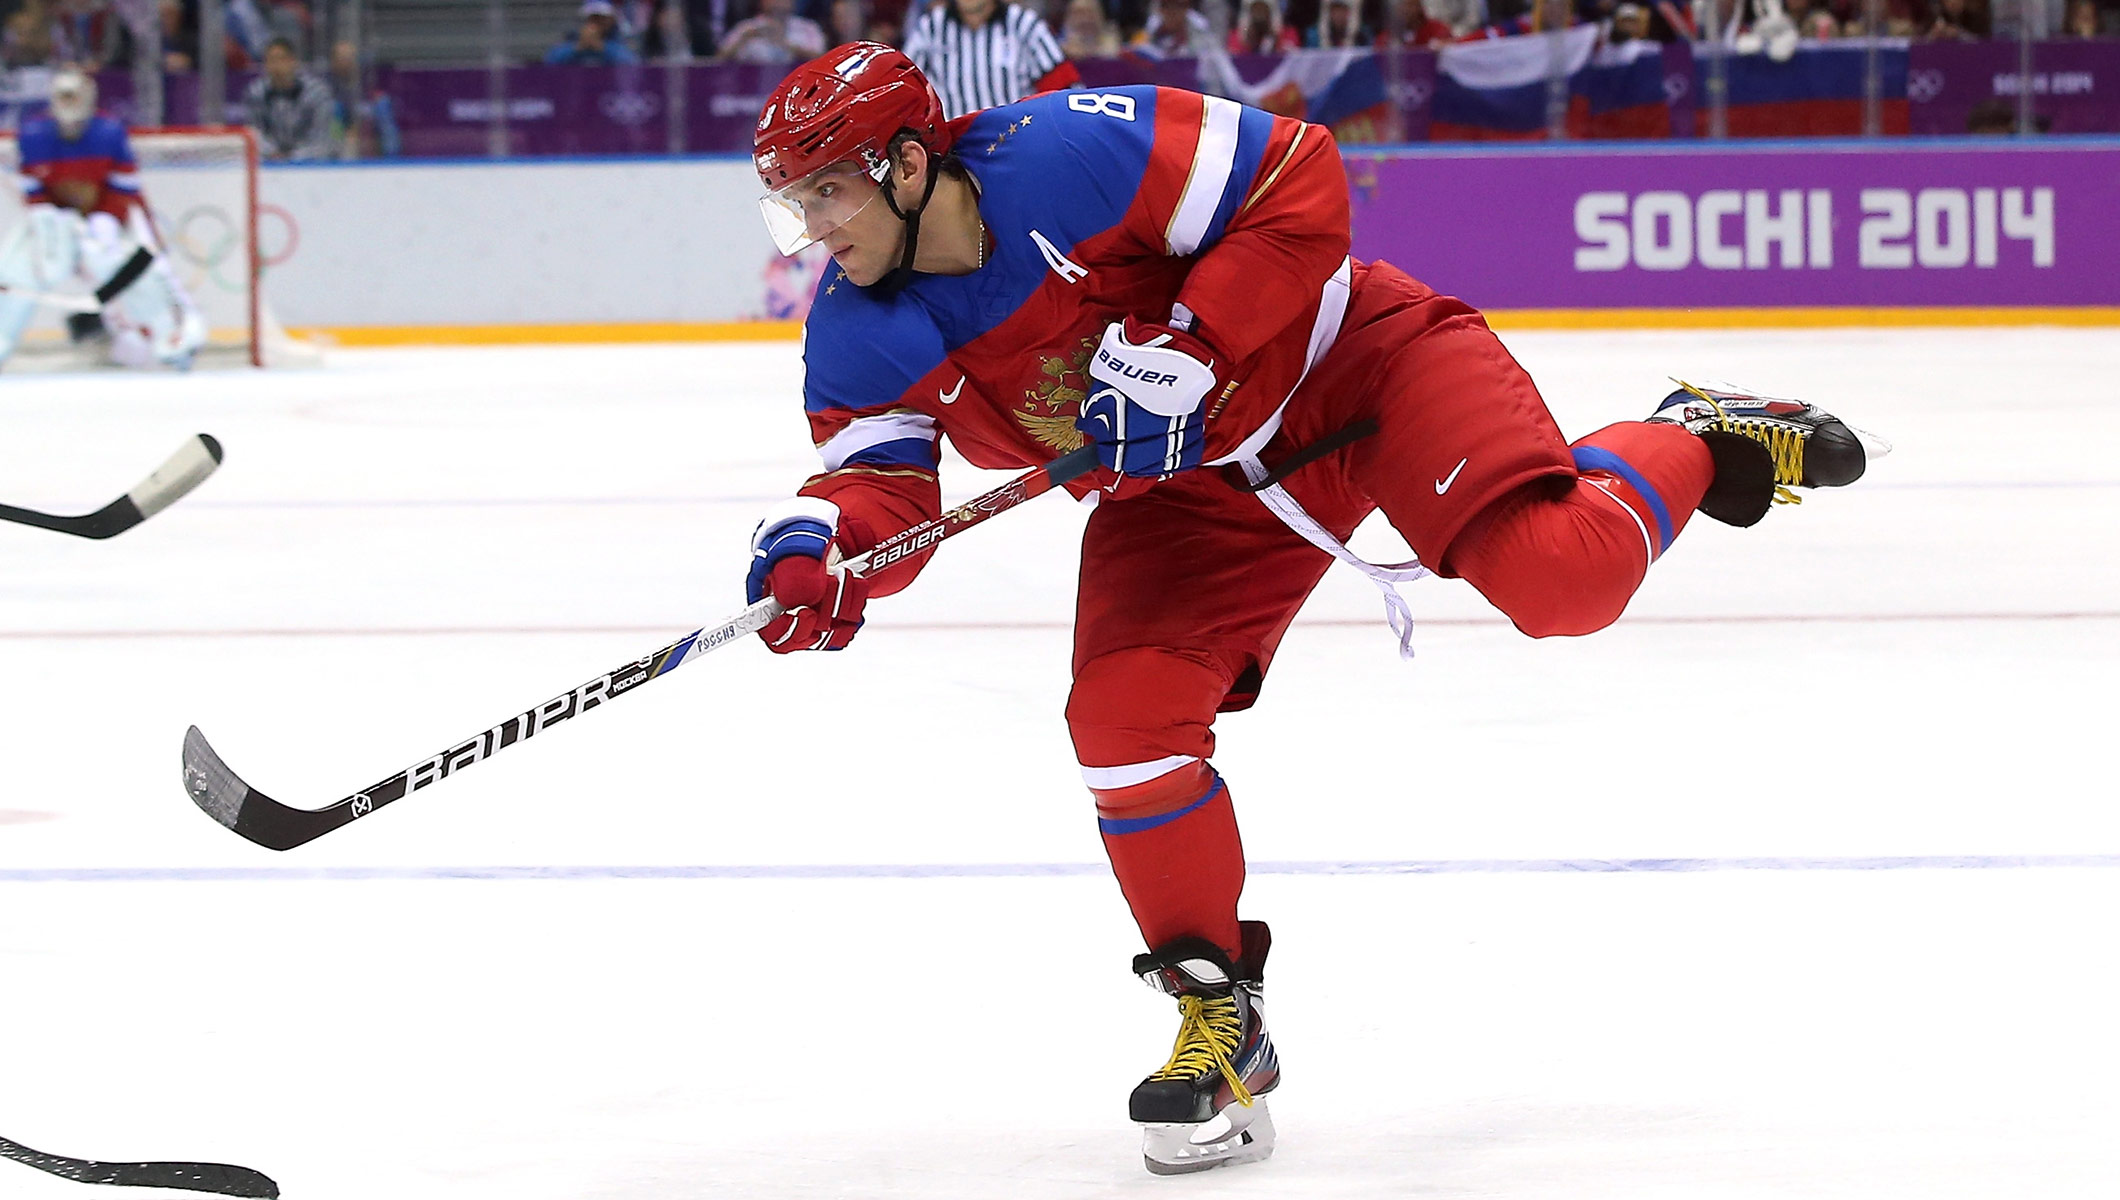 Alex Ovechkin believes Russians should still participate in the Olympics